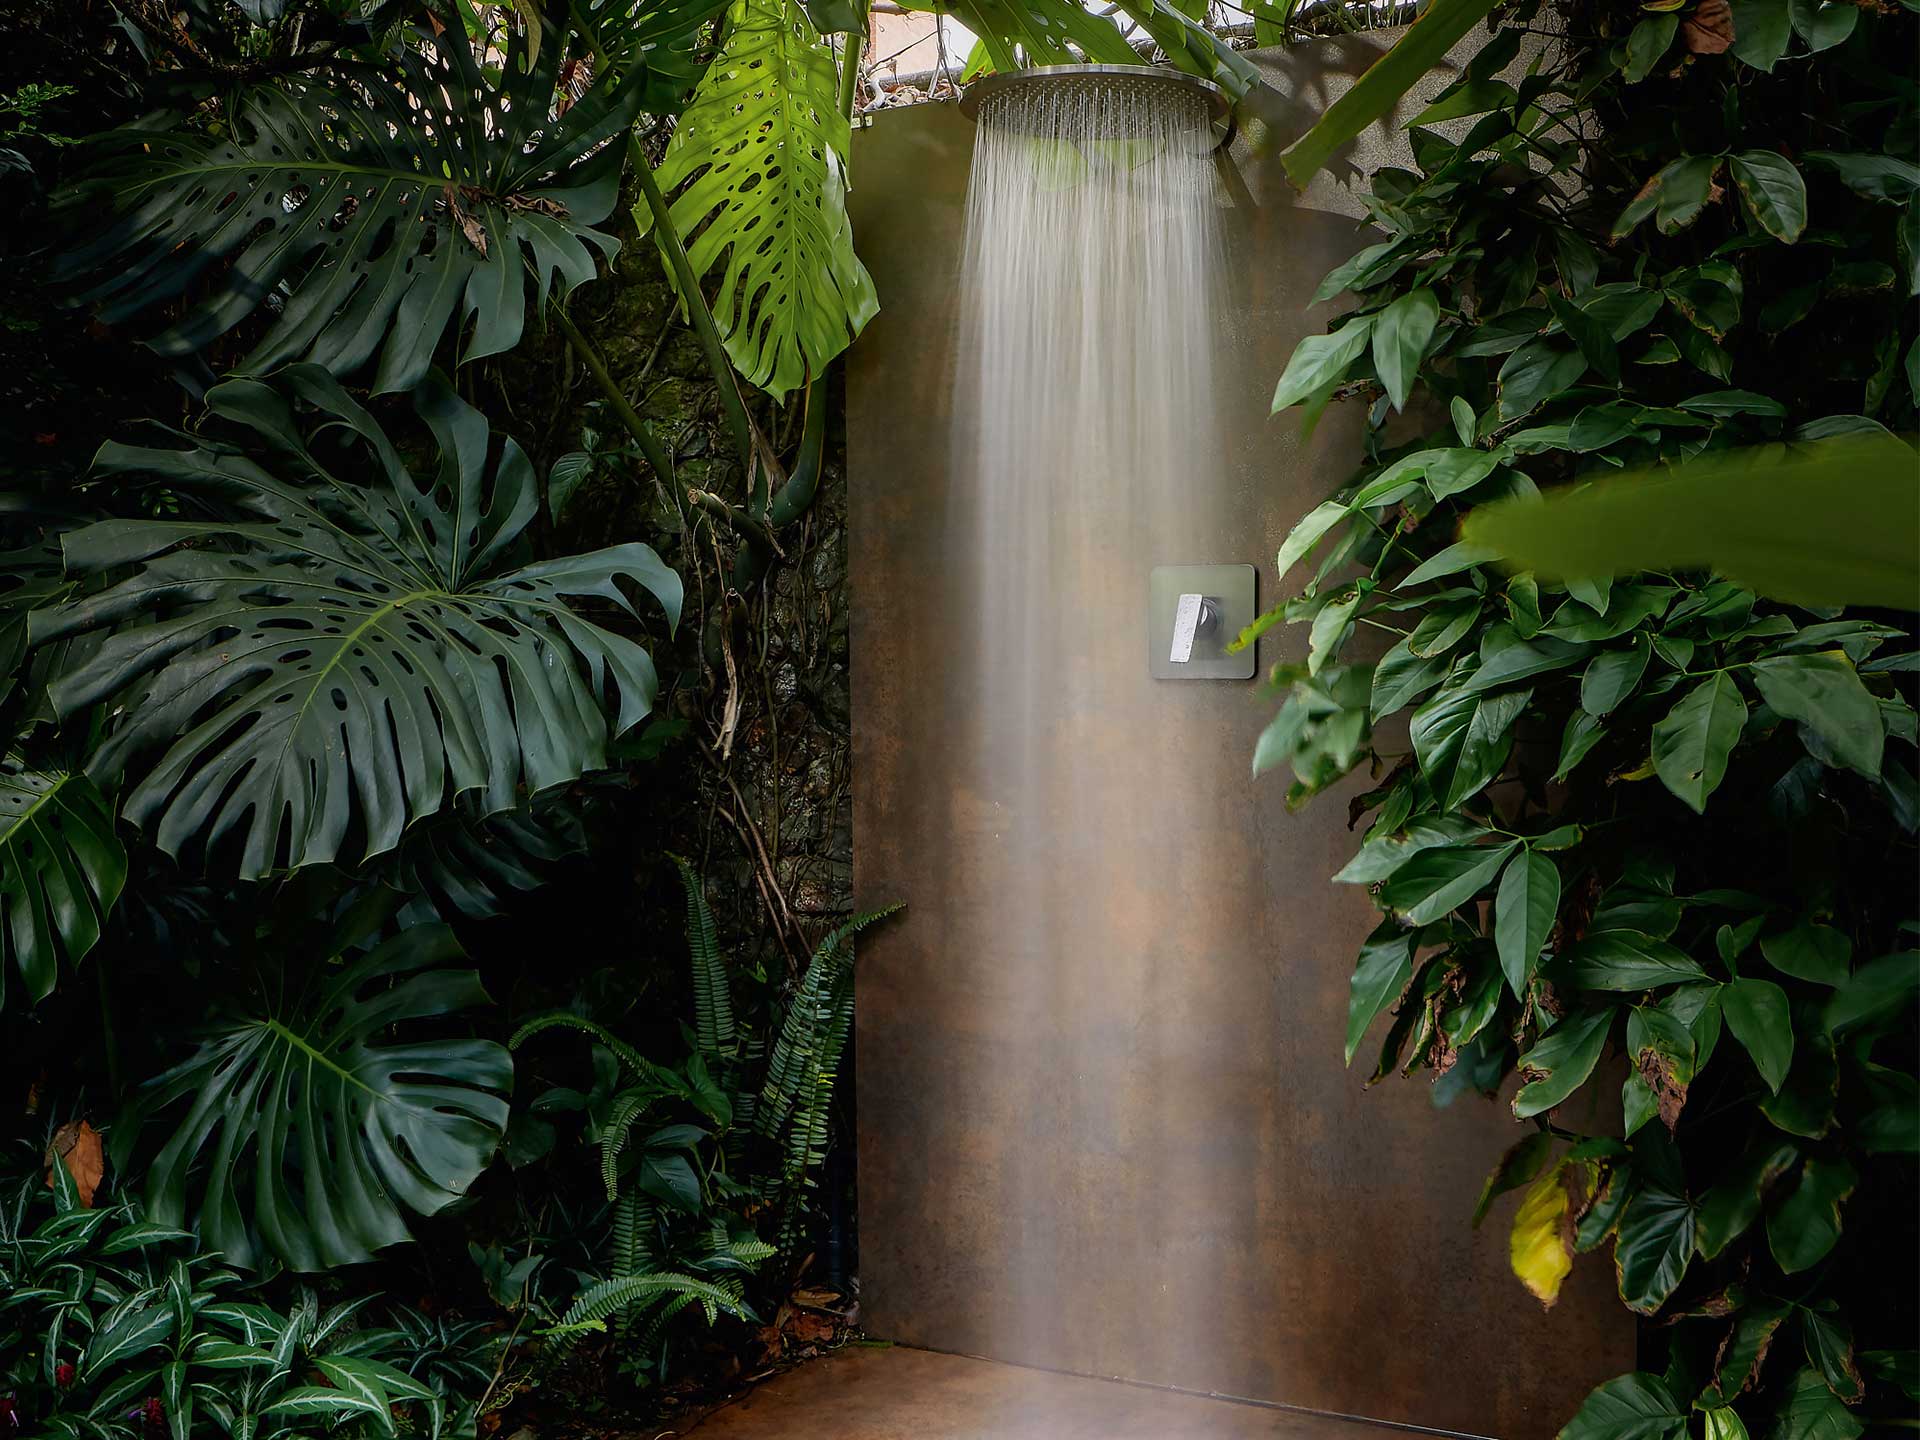 Creating a secret outdoor shower will bring a holiday vibe to your garden